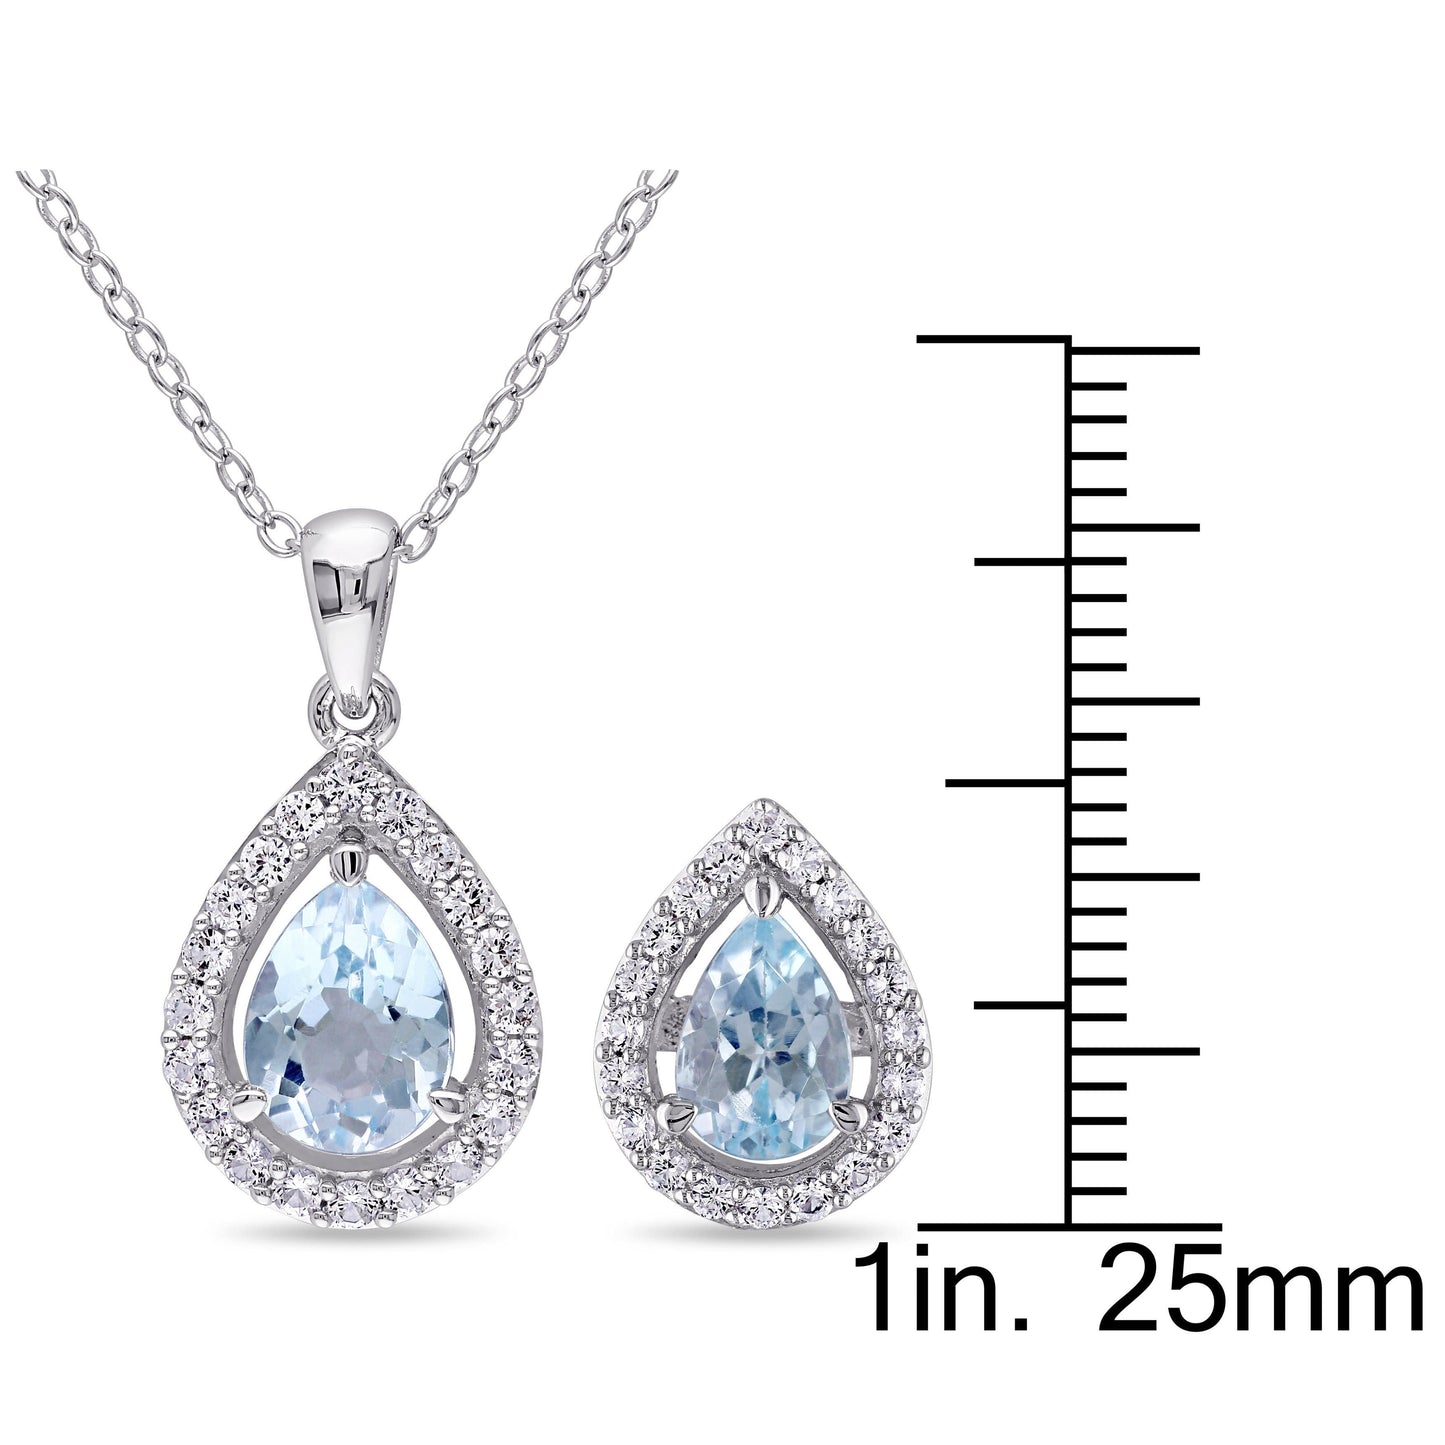 Blue Topaz & White Sapphire Set in Sterling Silver